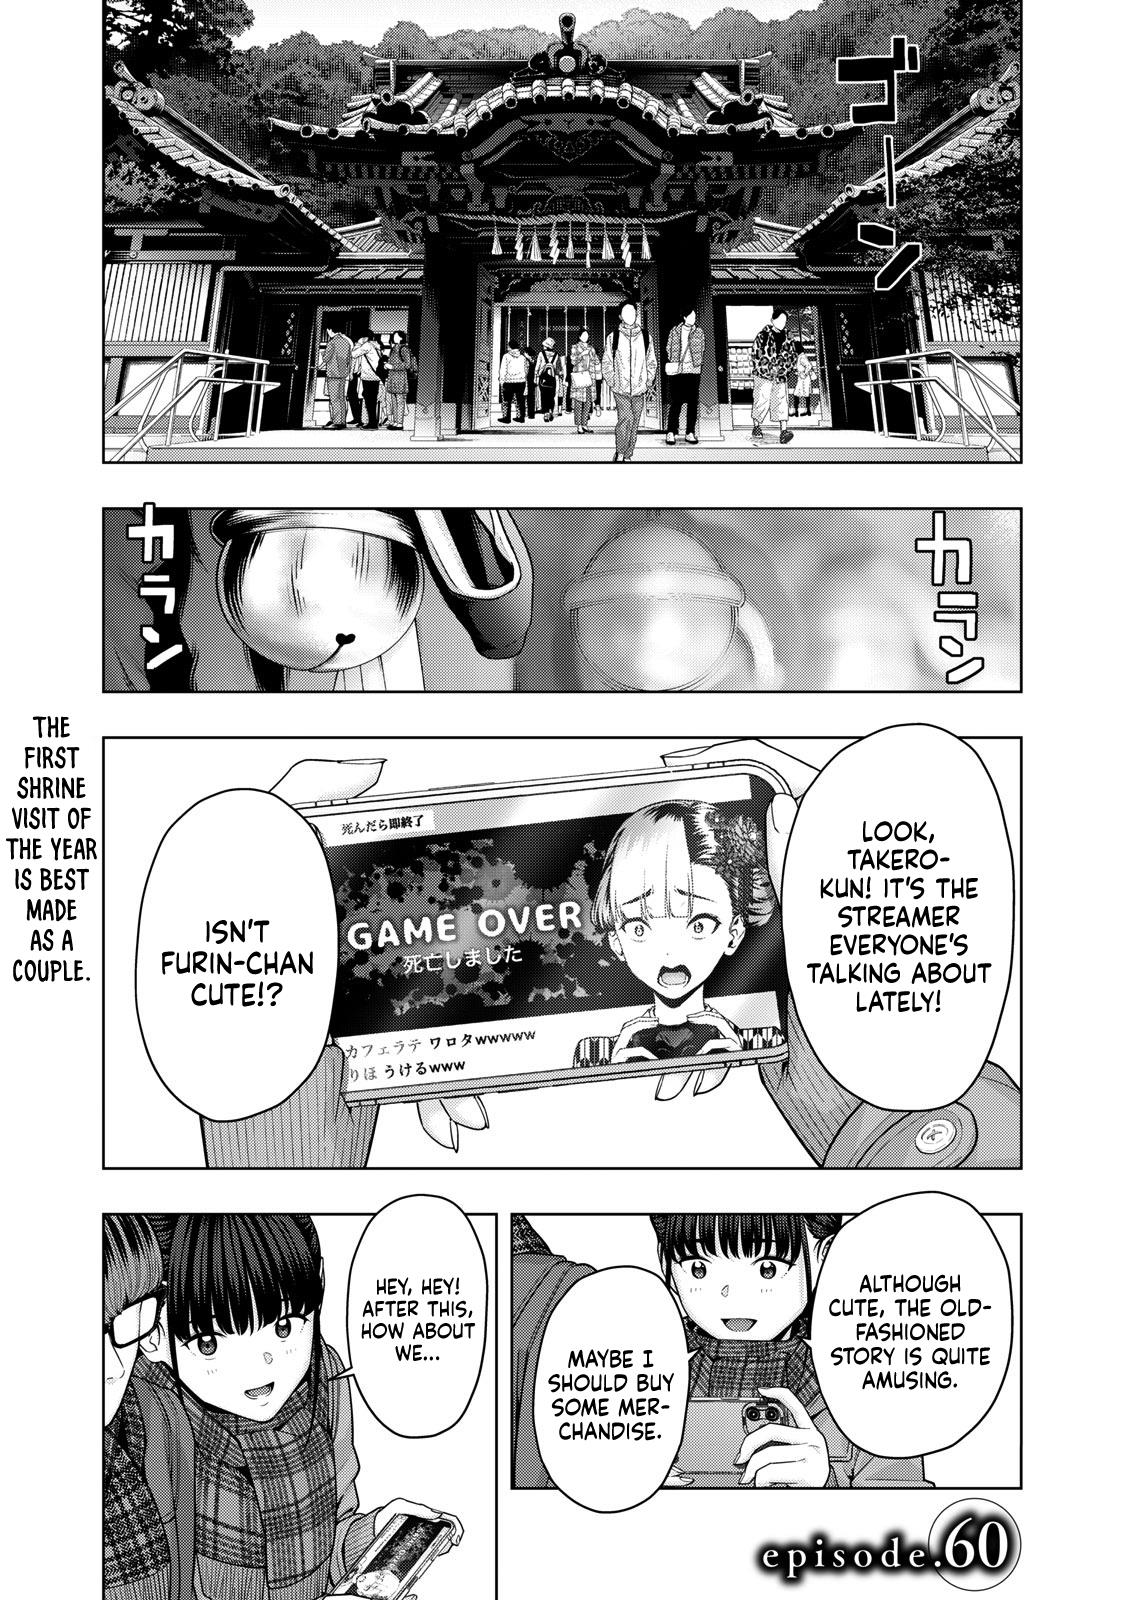 My Girlfriend's Friend Vol.4 Chapter 60 - Picture 2